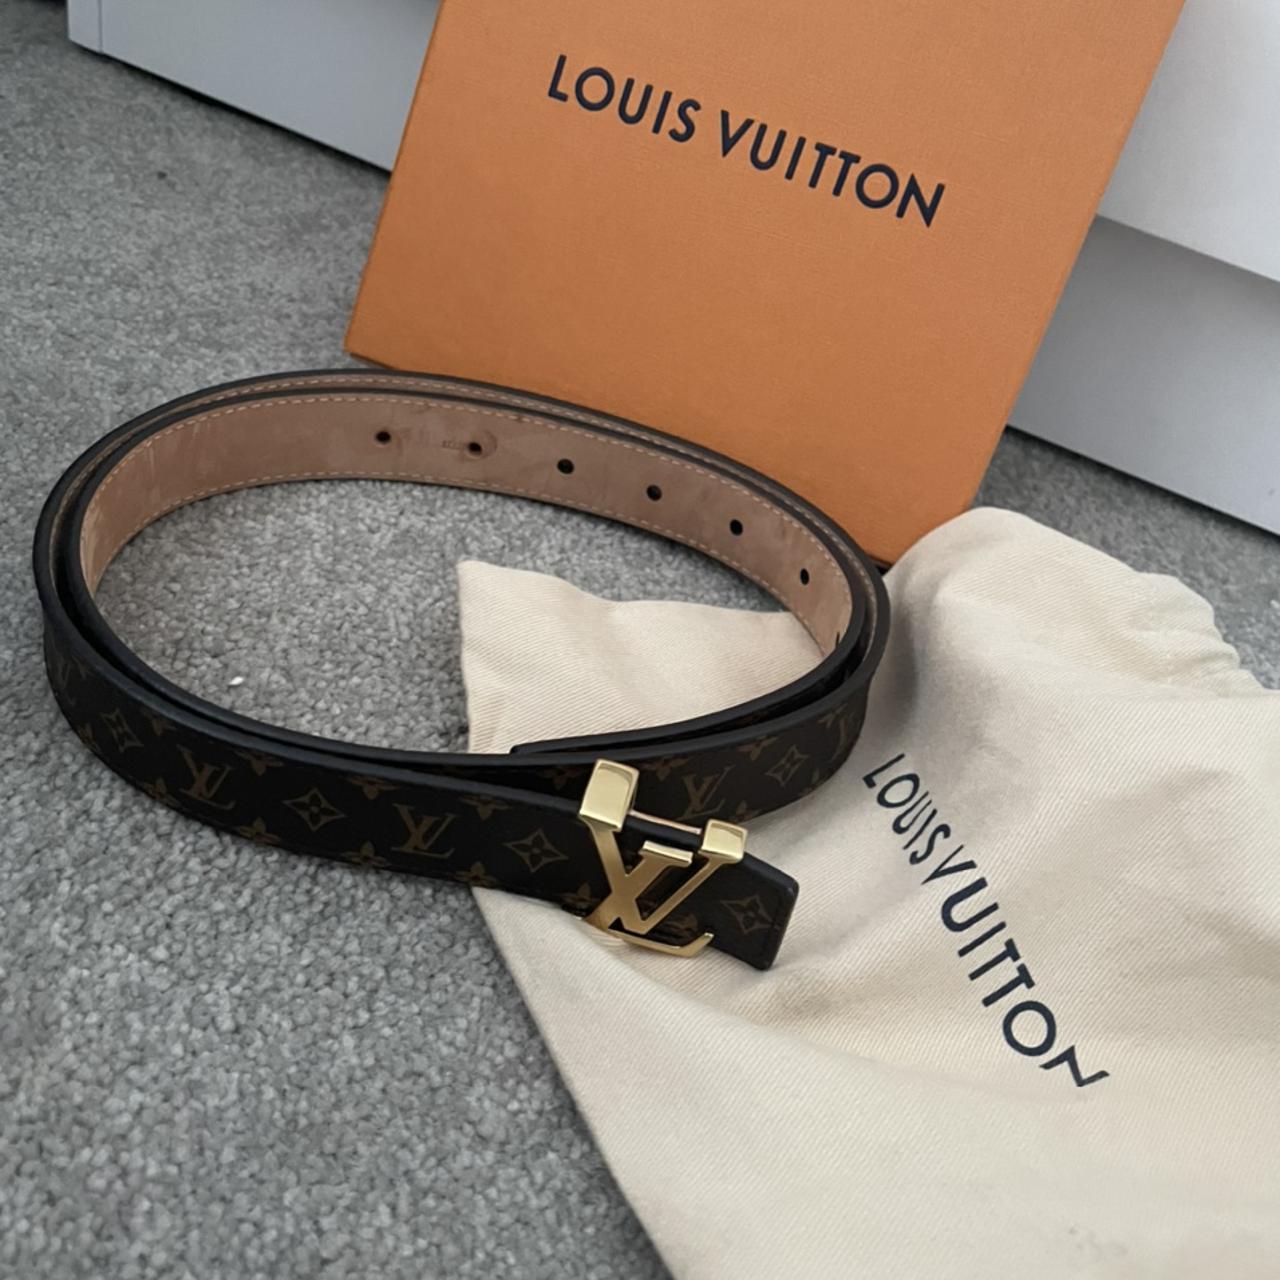 Brand new Louis Vuitton belt comes with box bag and